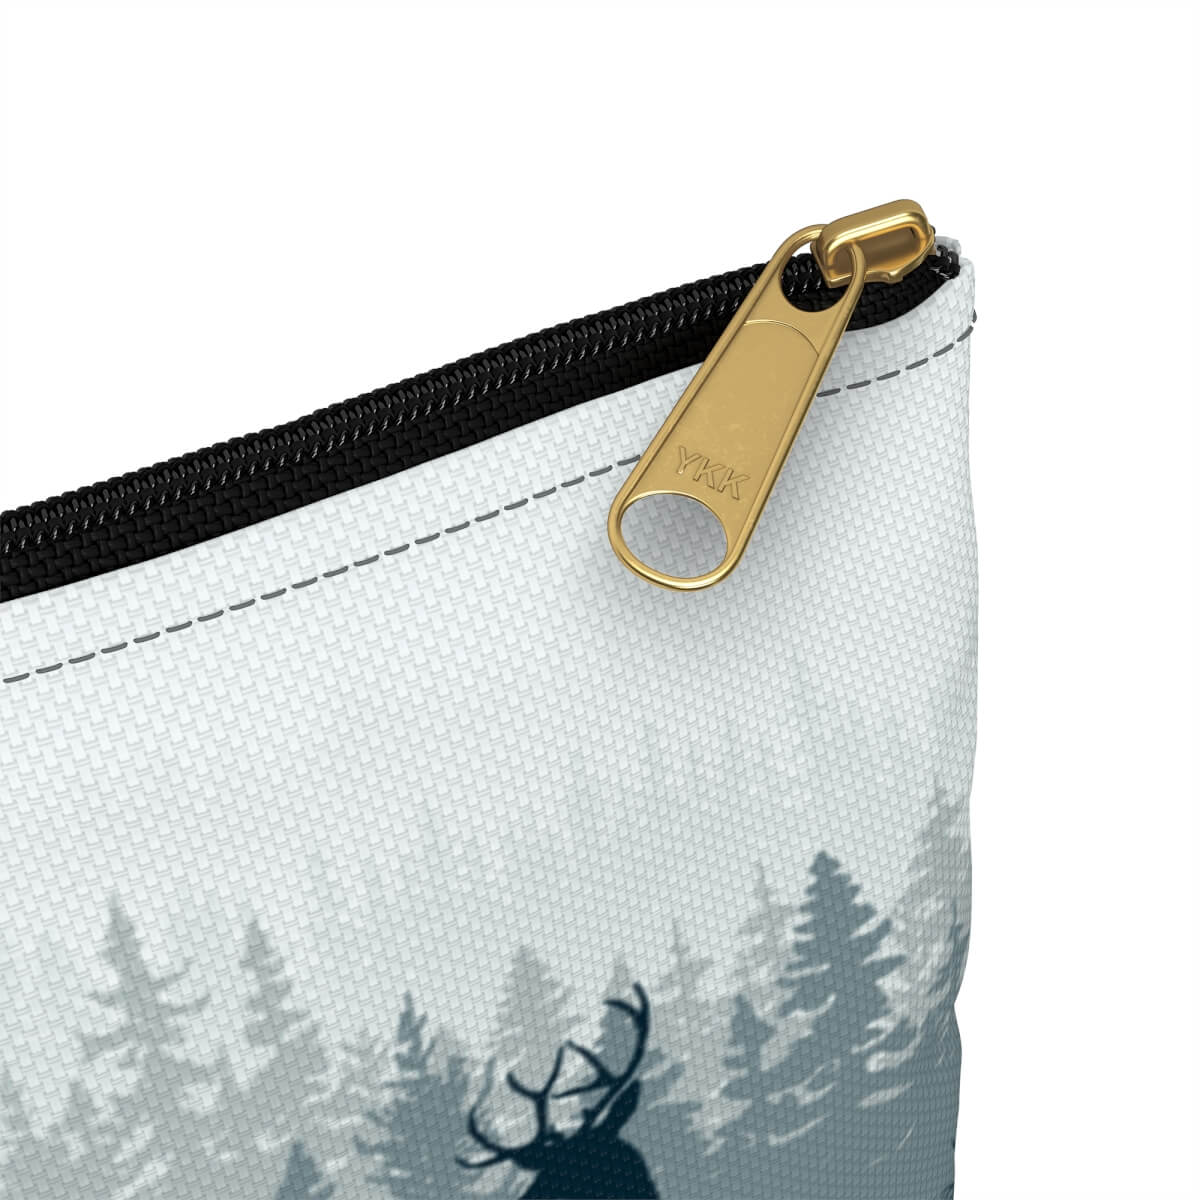 Personalized Deer Elk Family Accessories Pouch